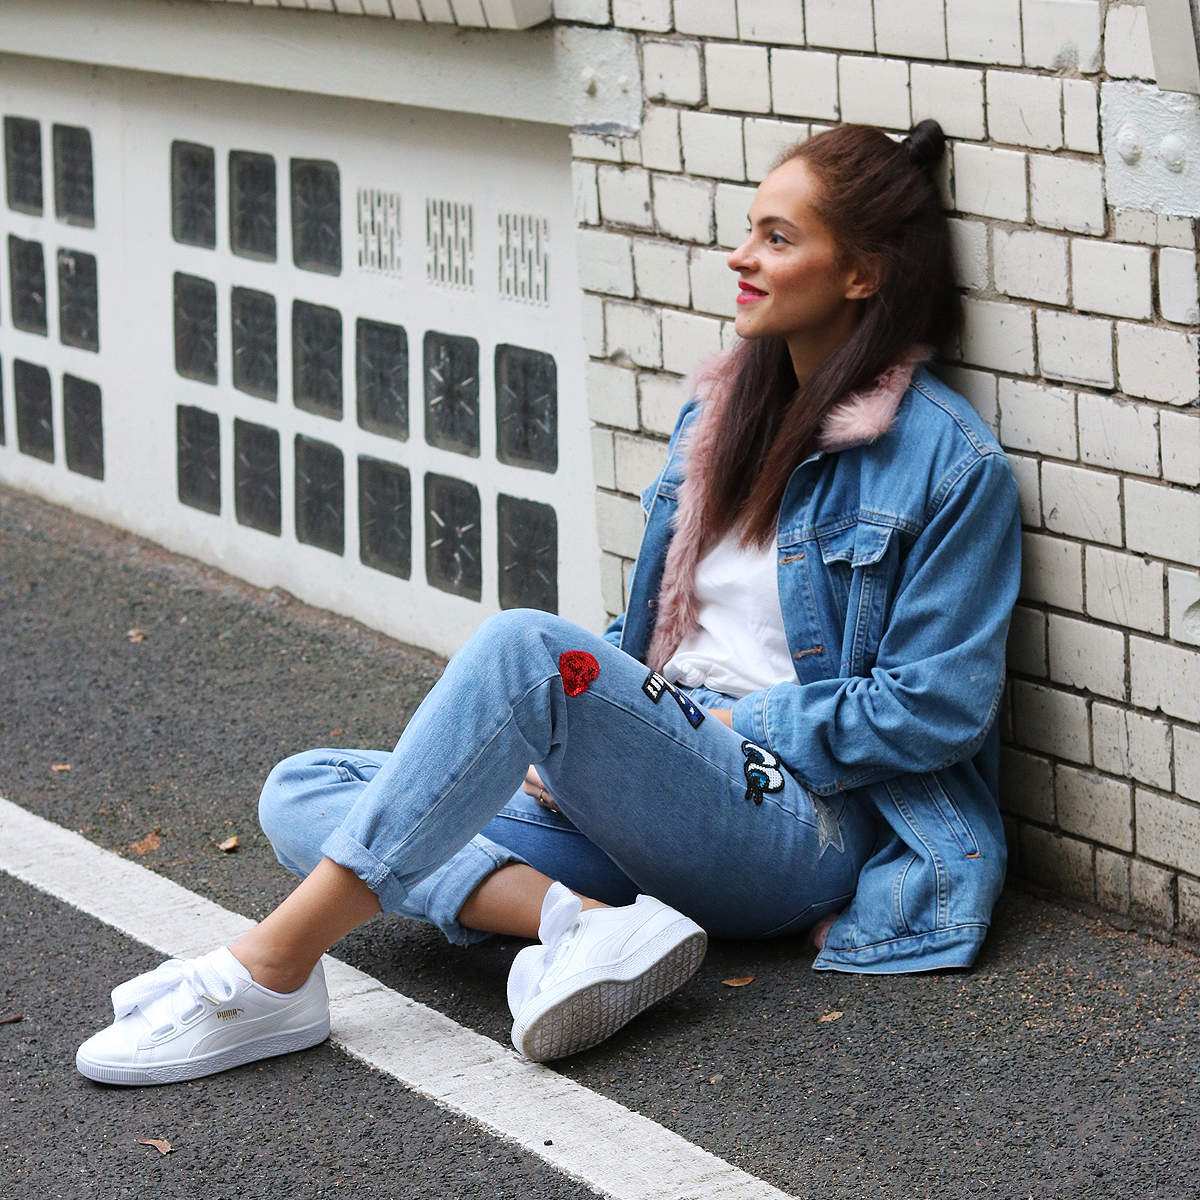 Fur lined denim jacket and patch jeans